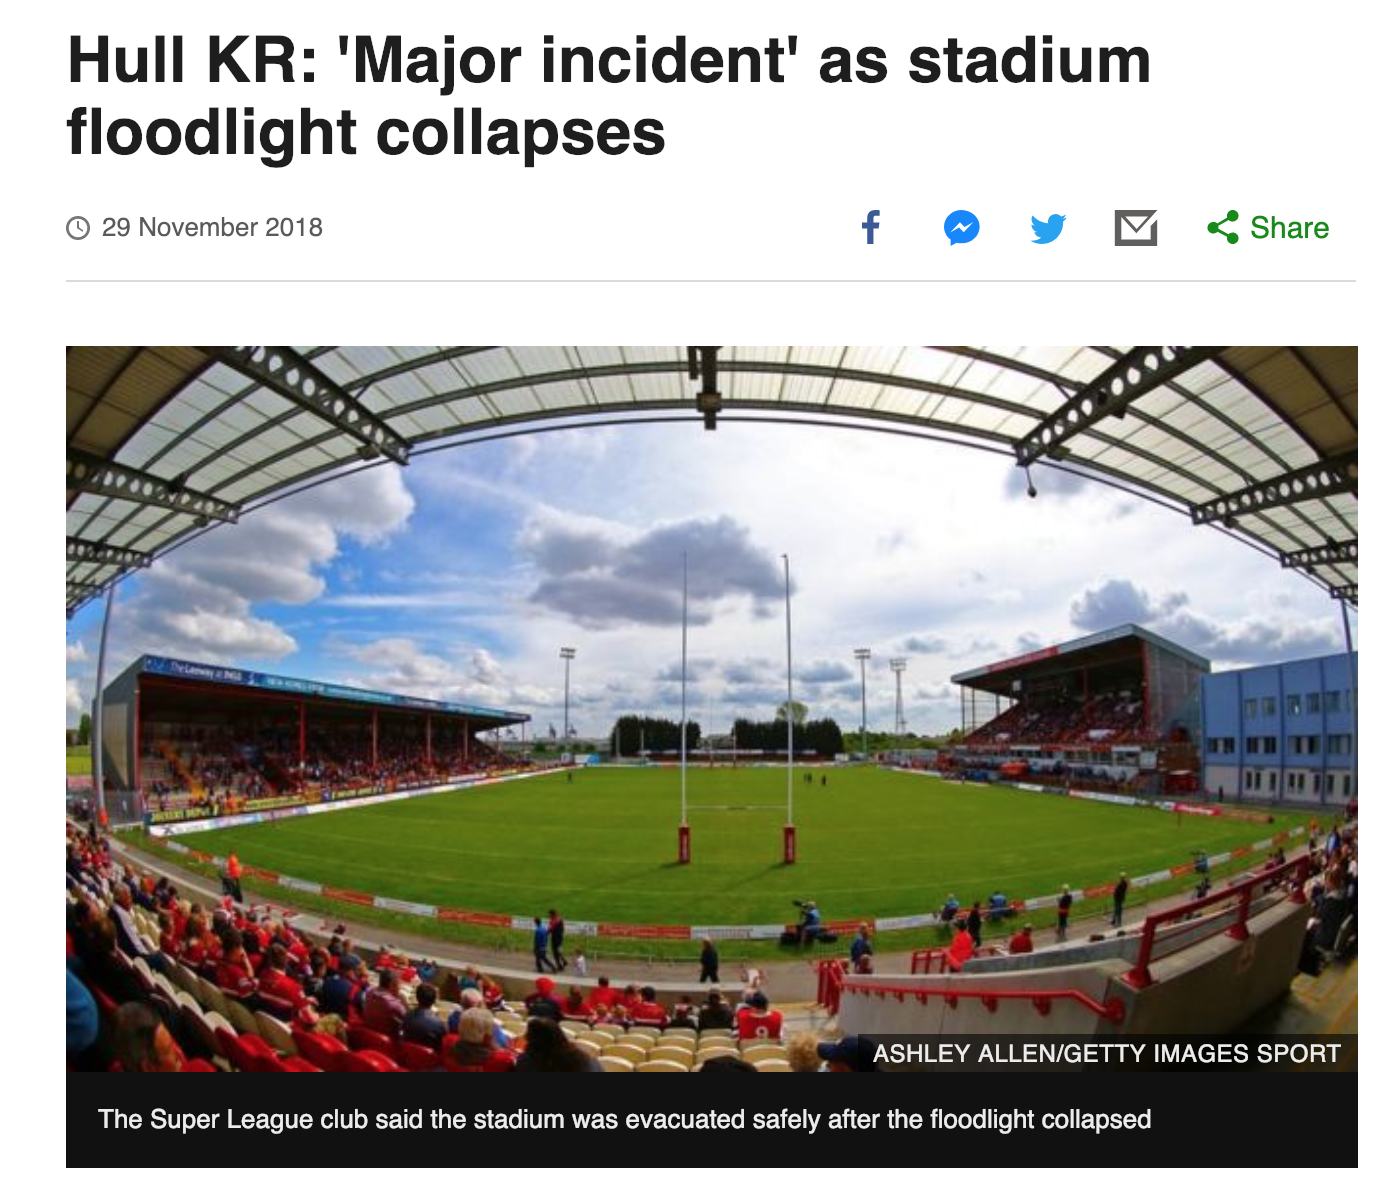 The BBC reported on Hull KR’s crisis management and safe evacuation of the stadium